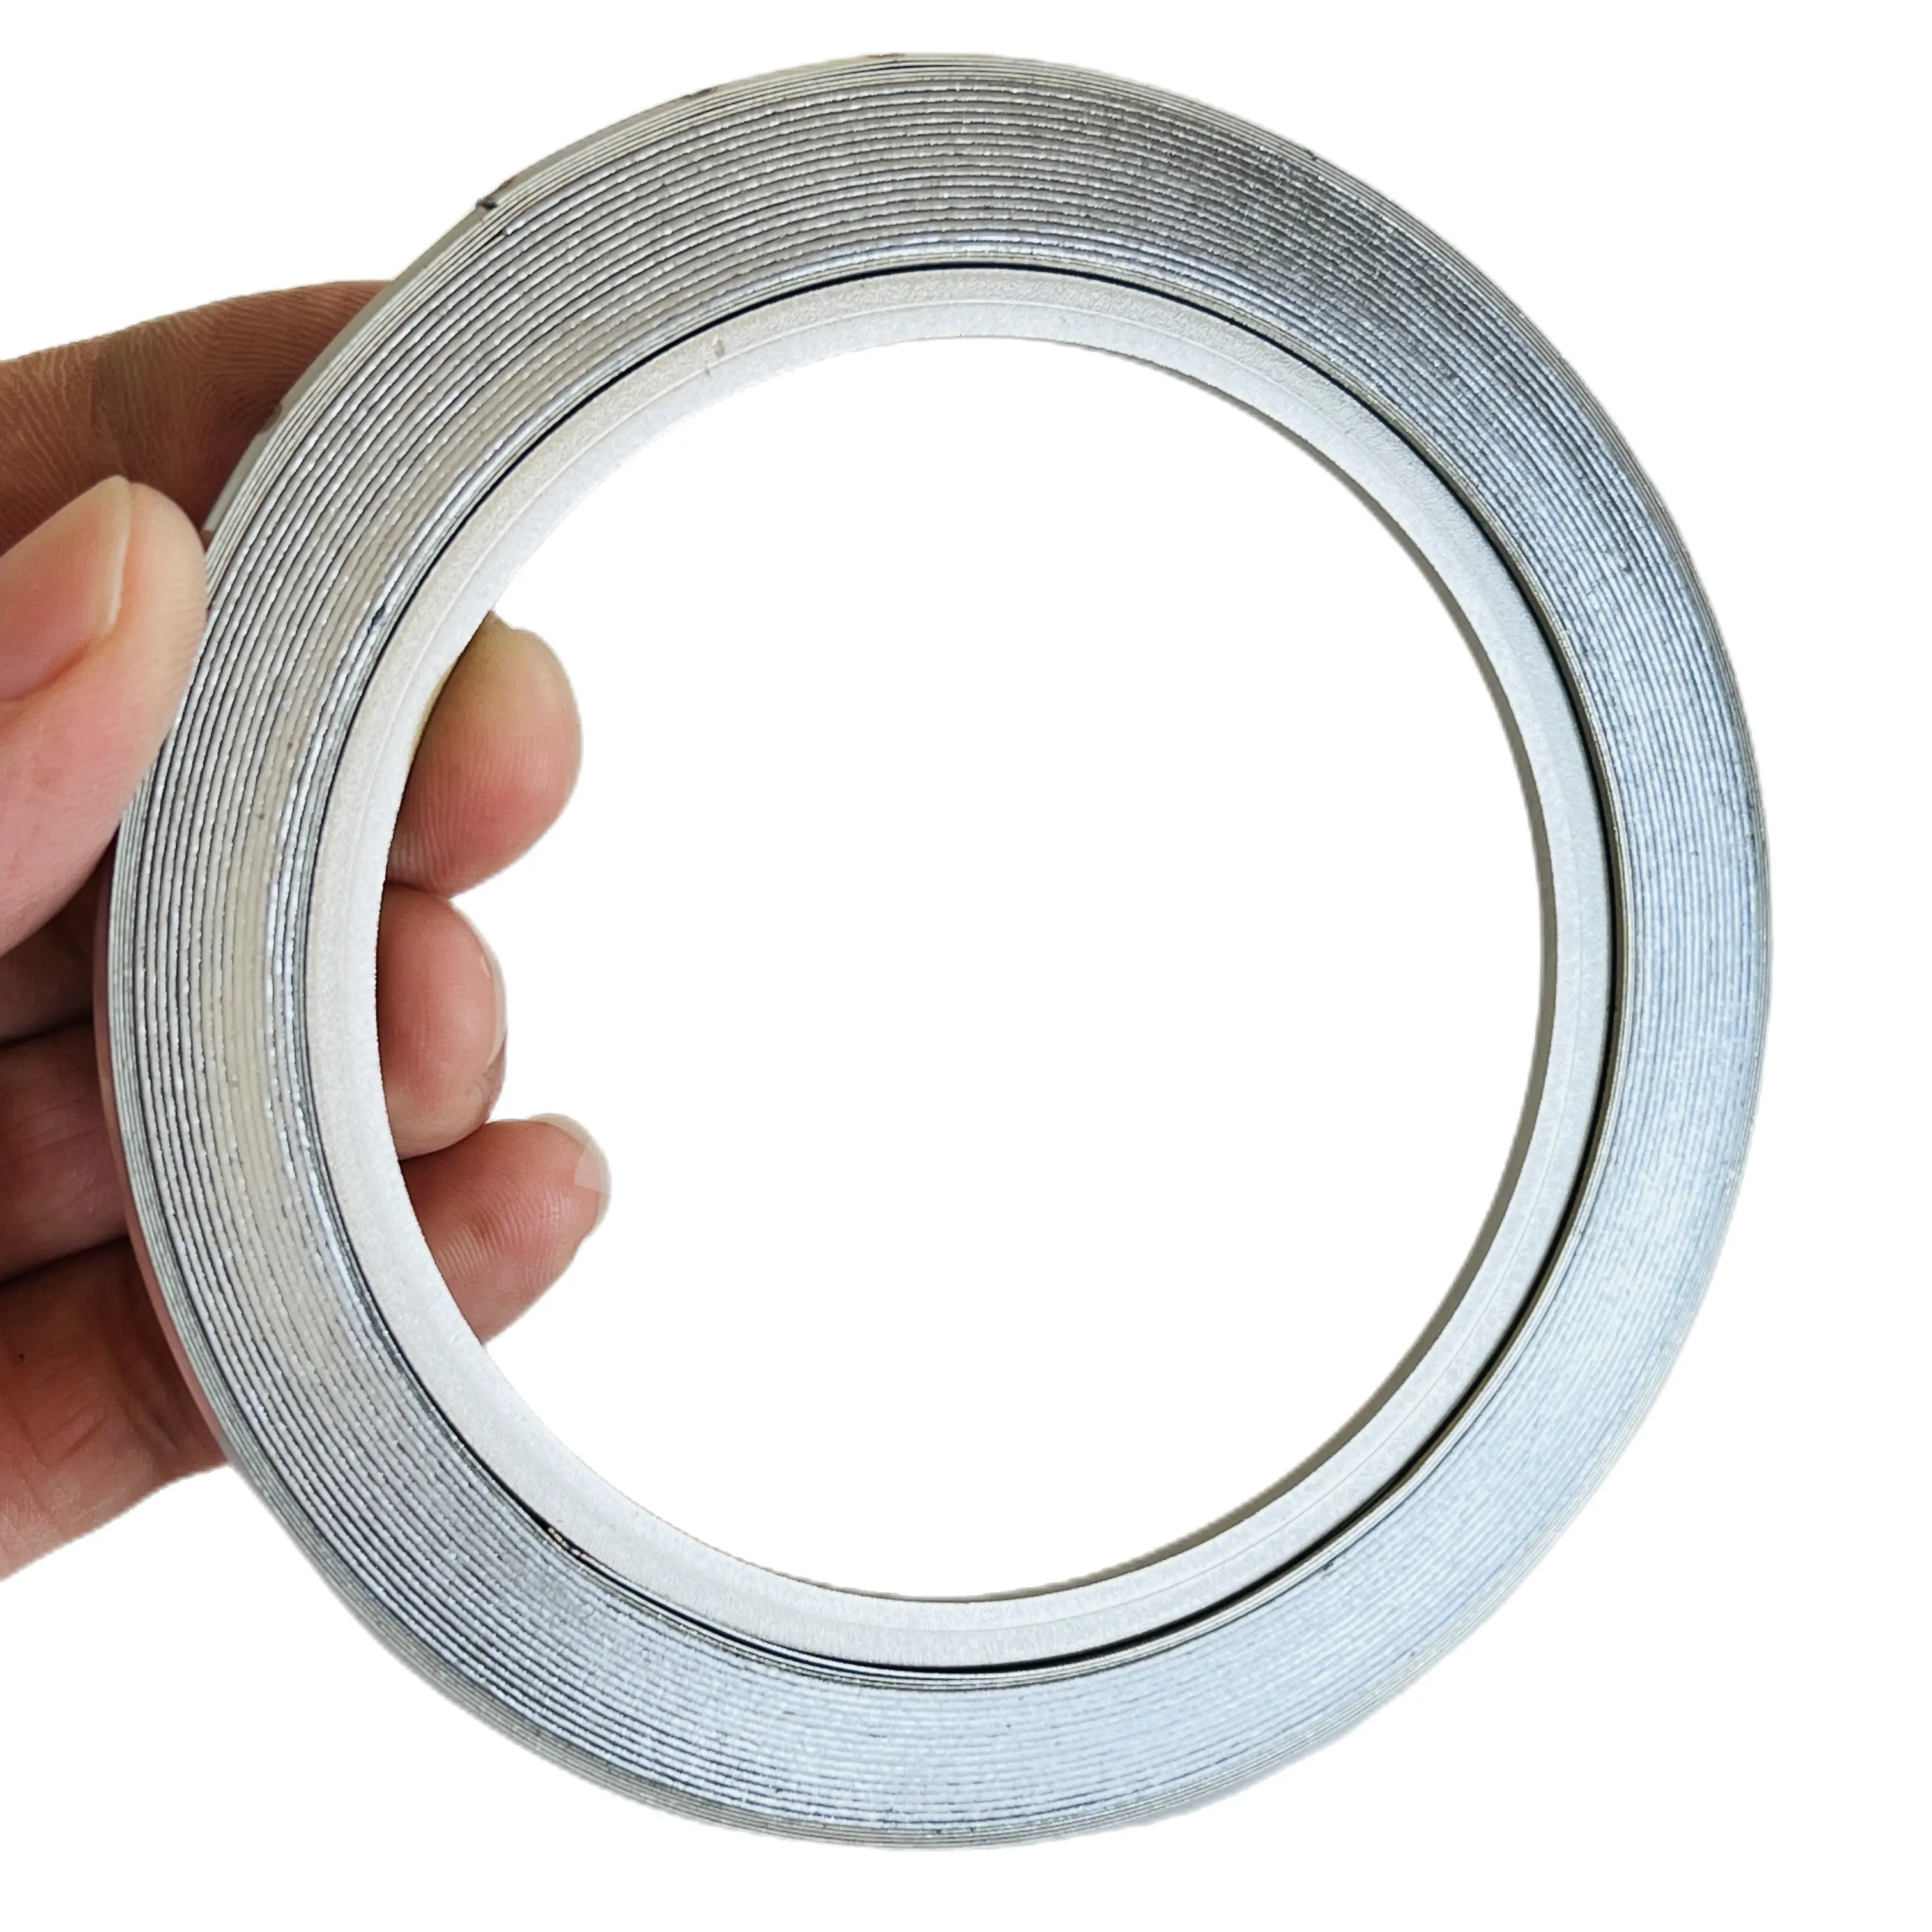 ASME B 16.20 B16.5 JIS DIN spiral wound gasket graphite filled With CS inner ring Stainless steel